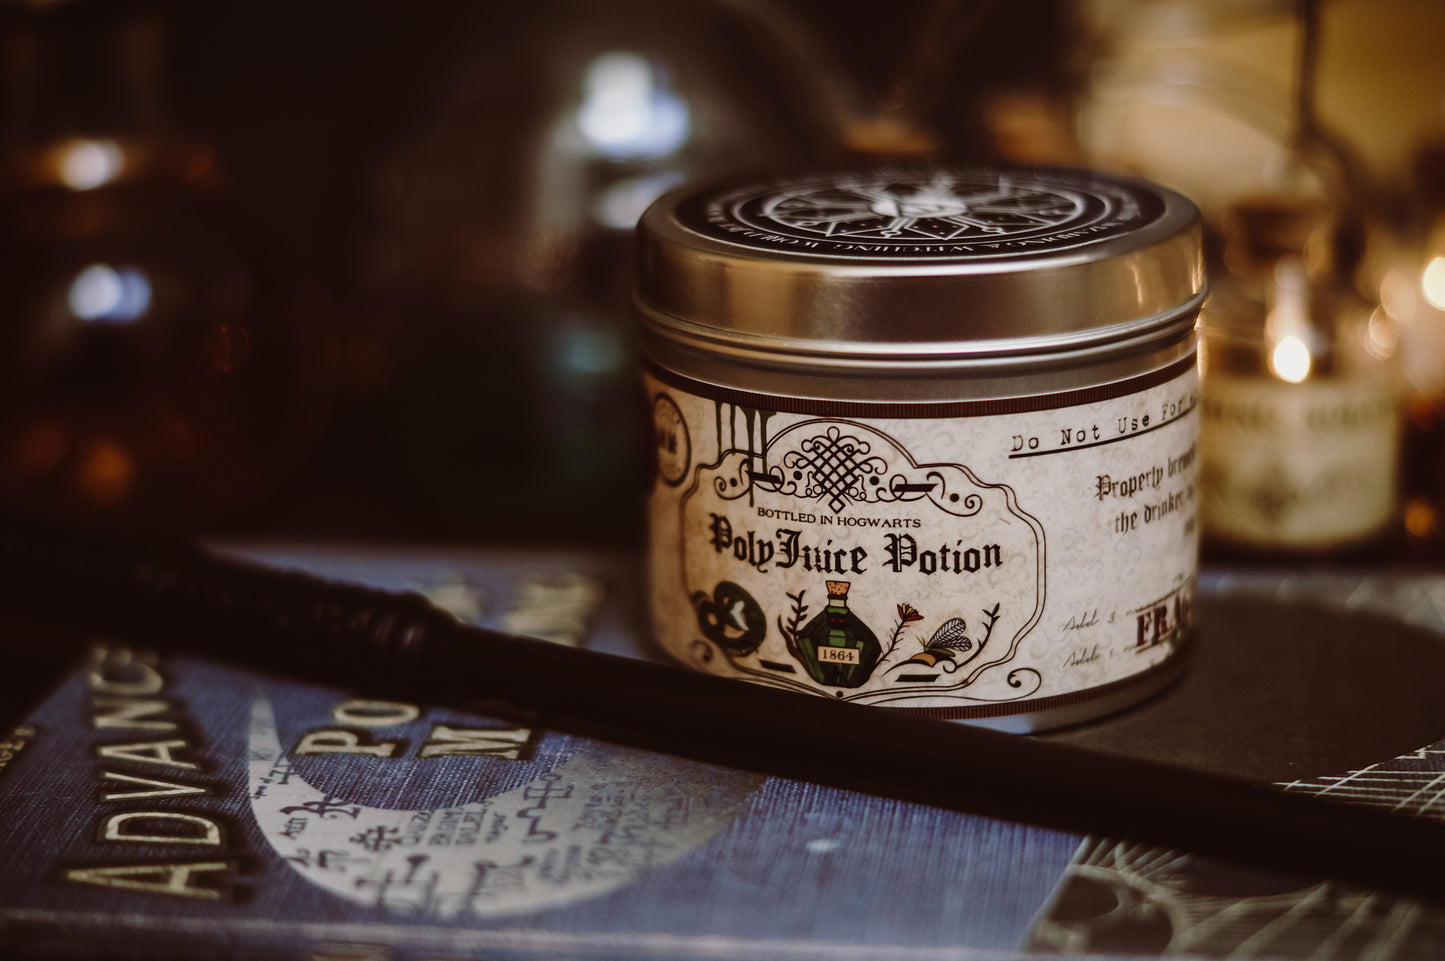 Happy Piranha's Polyjuice potion candle with a magic wand